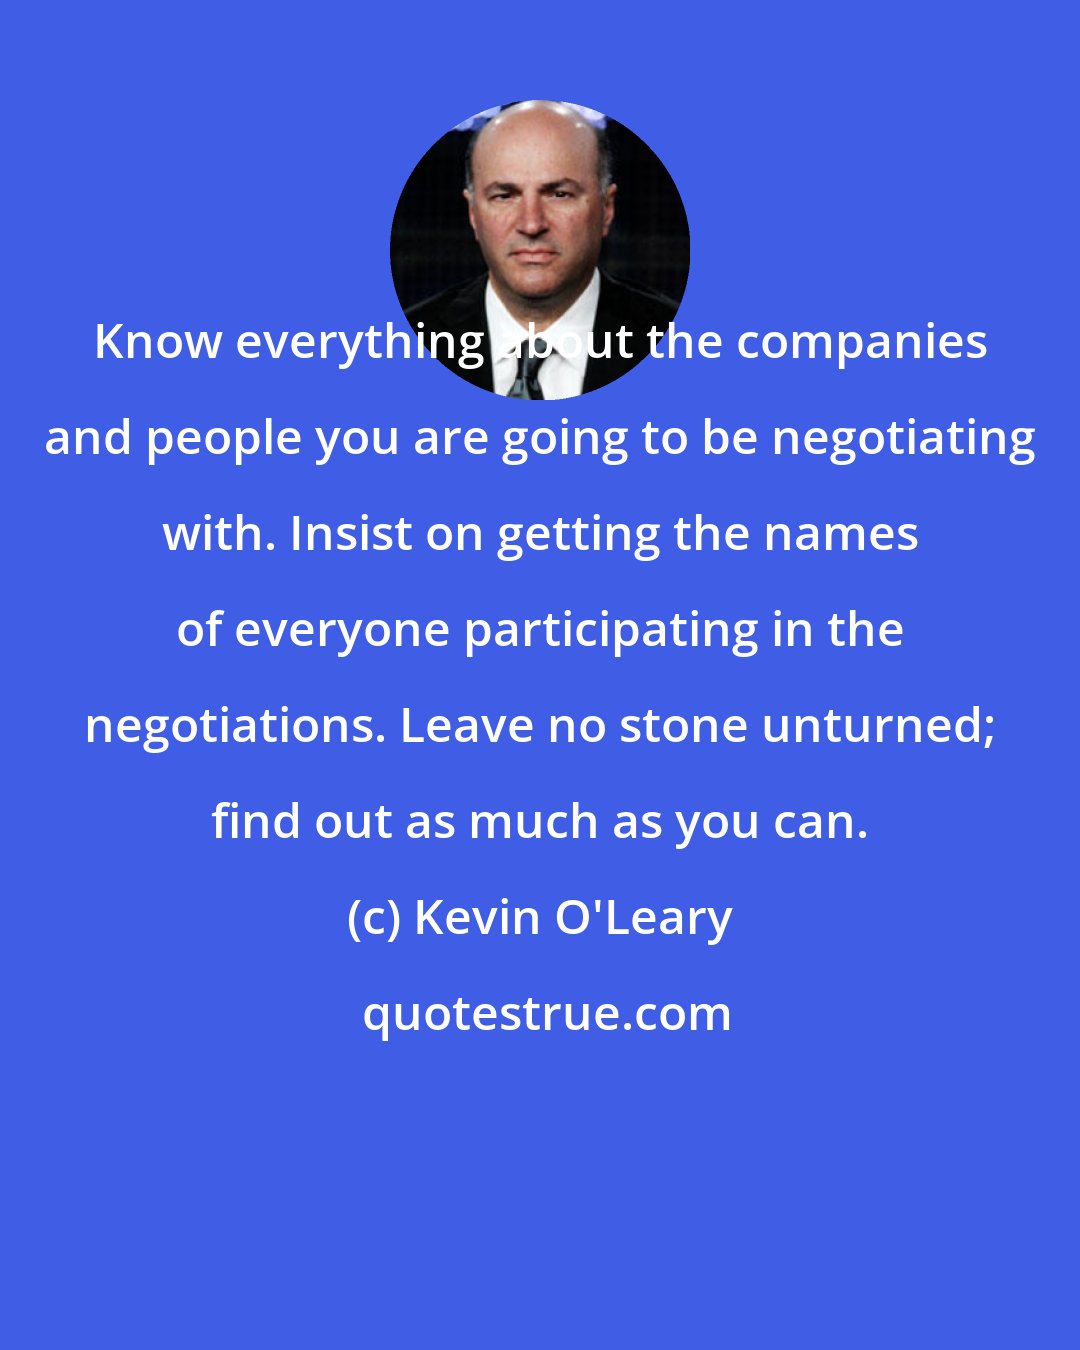 Kevin O'Leary: Know everything about the companies and people you are going to be negotiating with. Insist on getting the names of everyone participating in the negotiations. Leave no stone unturned; find out as much as you can.